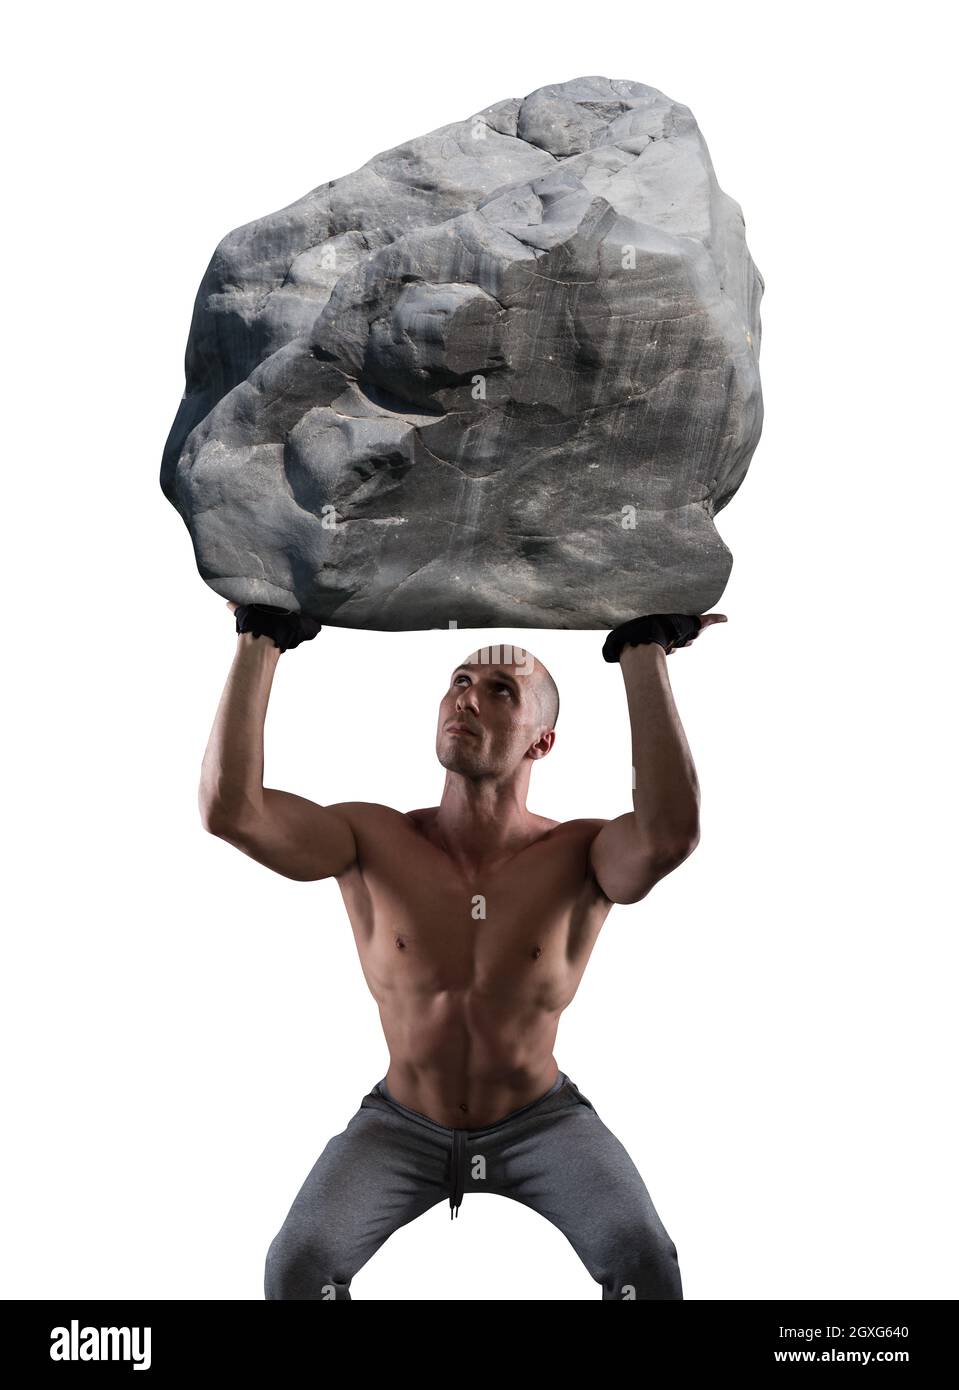 Muscular man with determination lifts a big boulder Stock Photo